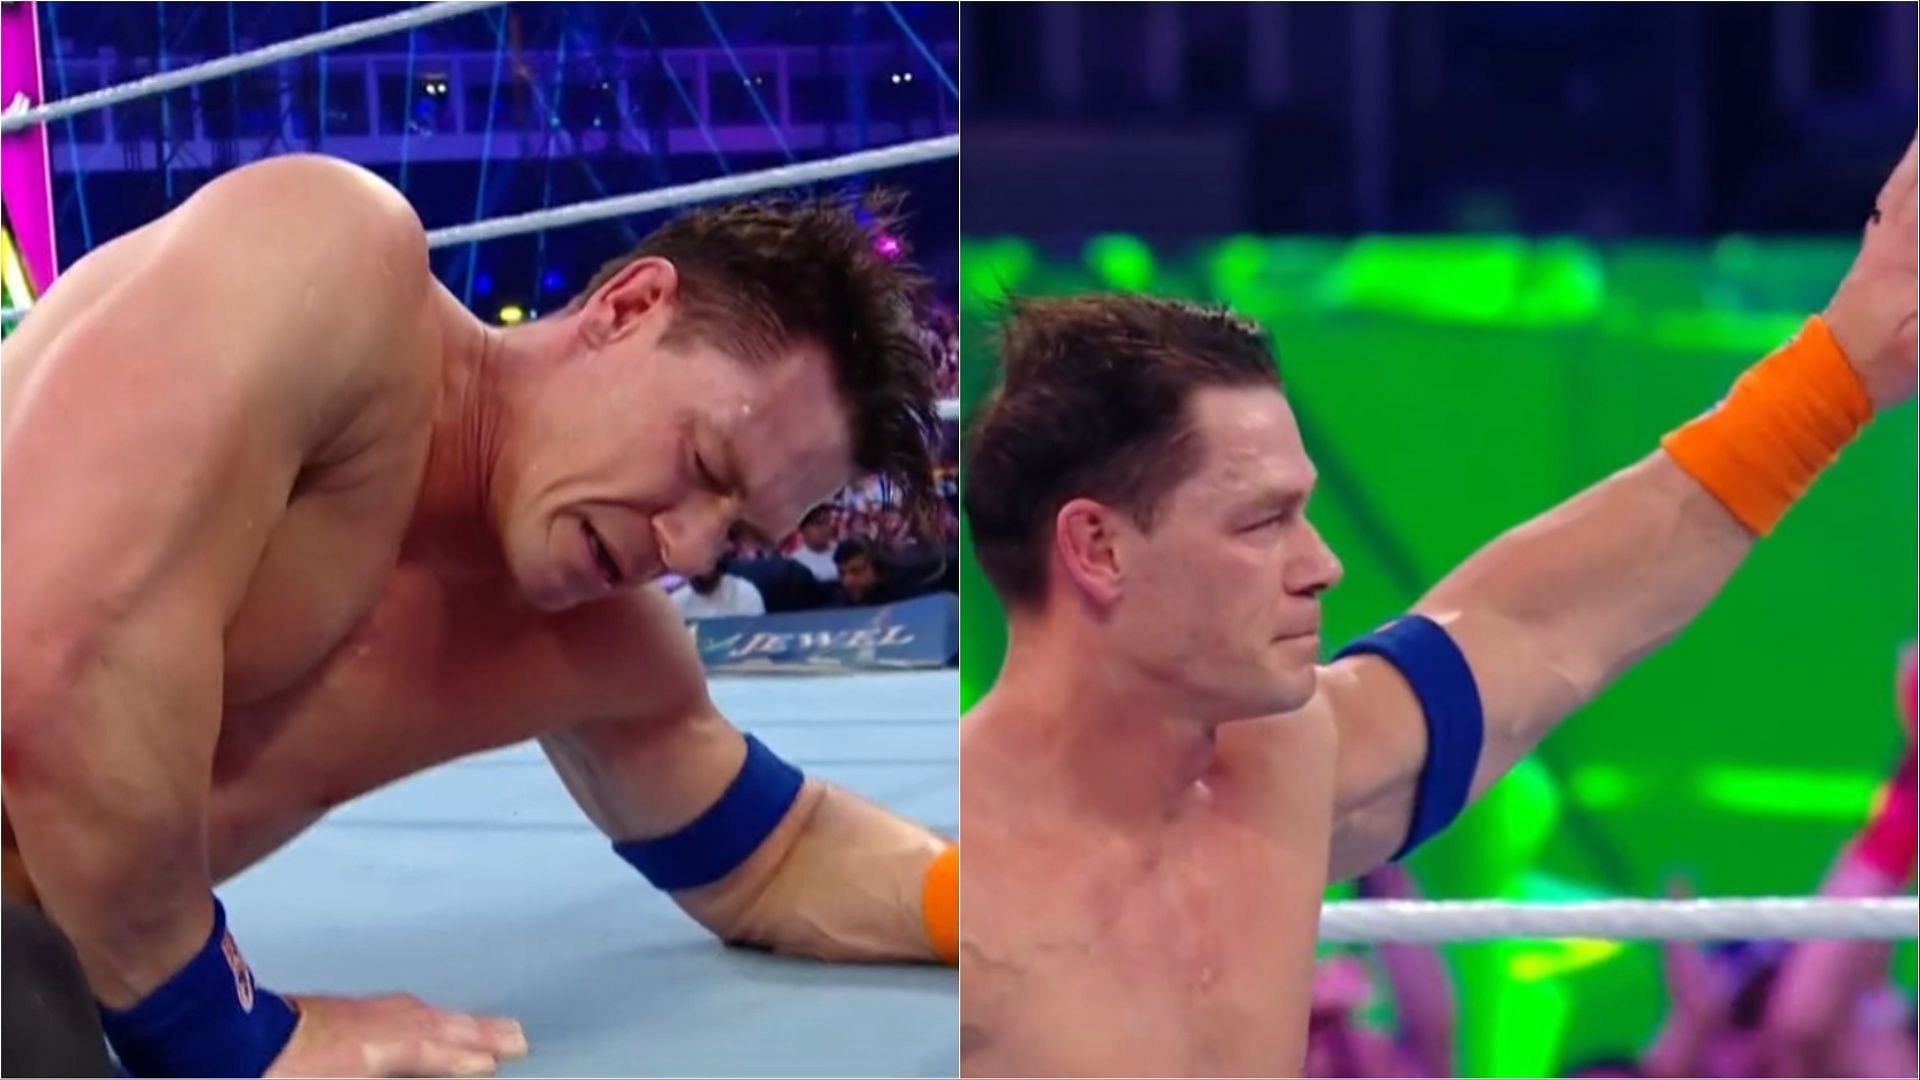 John Cena lost his match to Solo Sikoa at WWE Crown Jewel 2023.